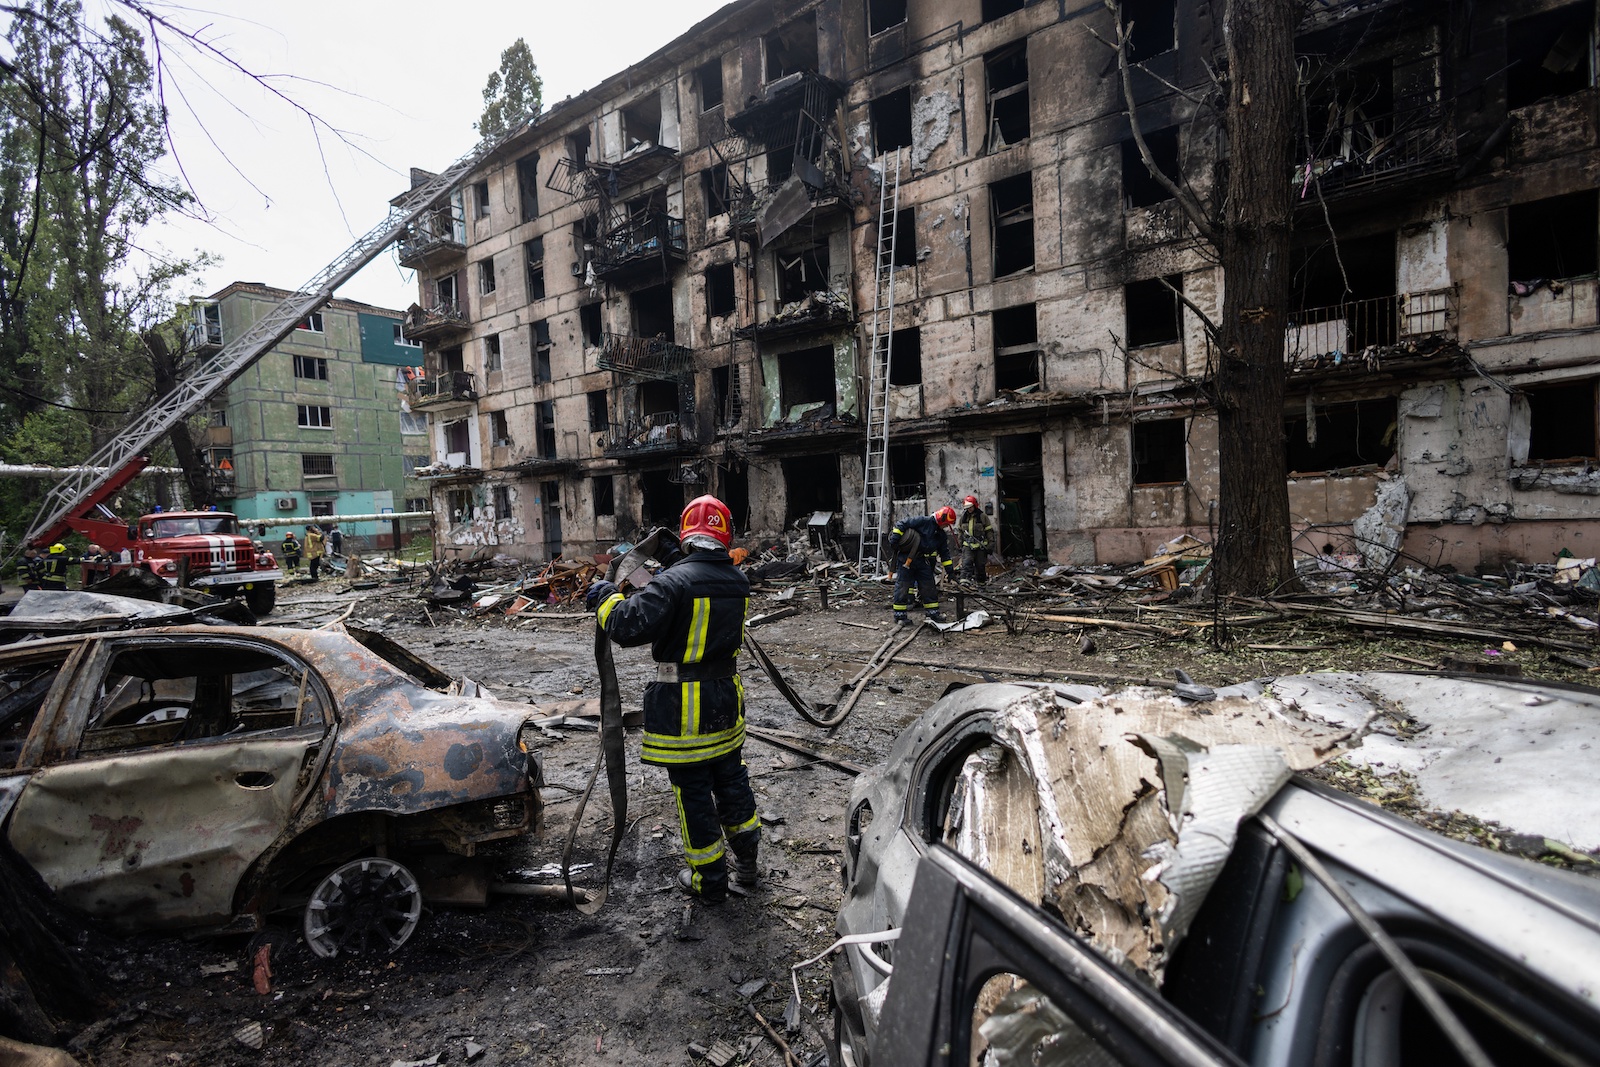 epa10688433 Rescuers at the scene of an apartment block, hit by a Russian missile, in Kryvy Rih, Dnipropetrovsk region, Ukraine, 13 June 2023. At least three people were killed and 25 others were wounded in an overnight Russian missile strike on a five-story apartment building in the city of Kryviy Rih in Ukraine's Dnipropetrovsk region, according to Mayor Oleksandr Vilkul. Russian troops entered Ukraine on 24 February 2022 starting a conflict that has provoked destruction and a humanitarian crisis.  EPA/STAS KOZLIUK